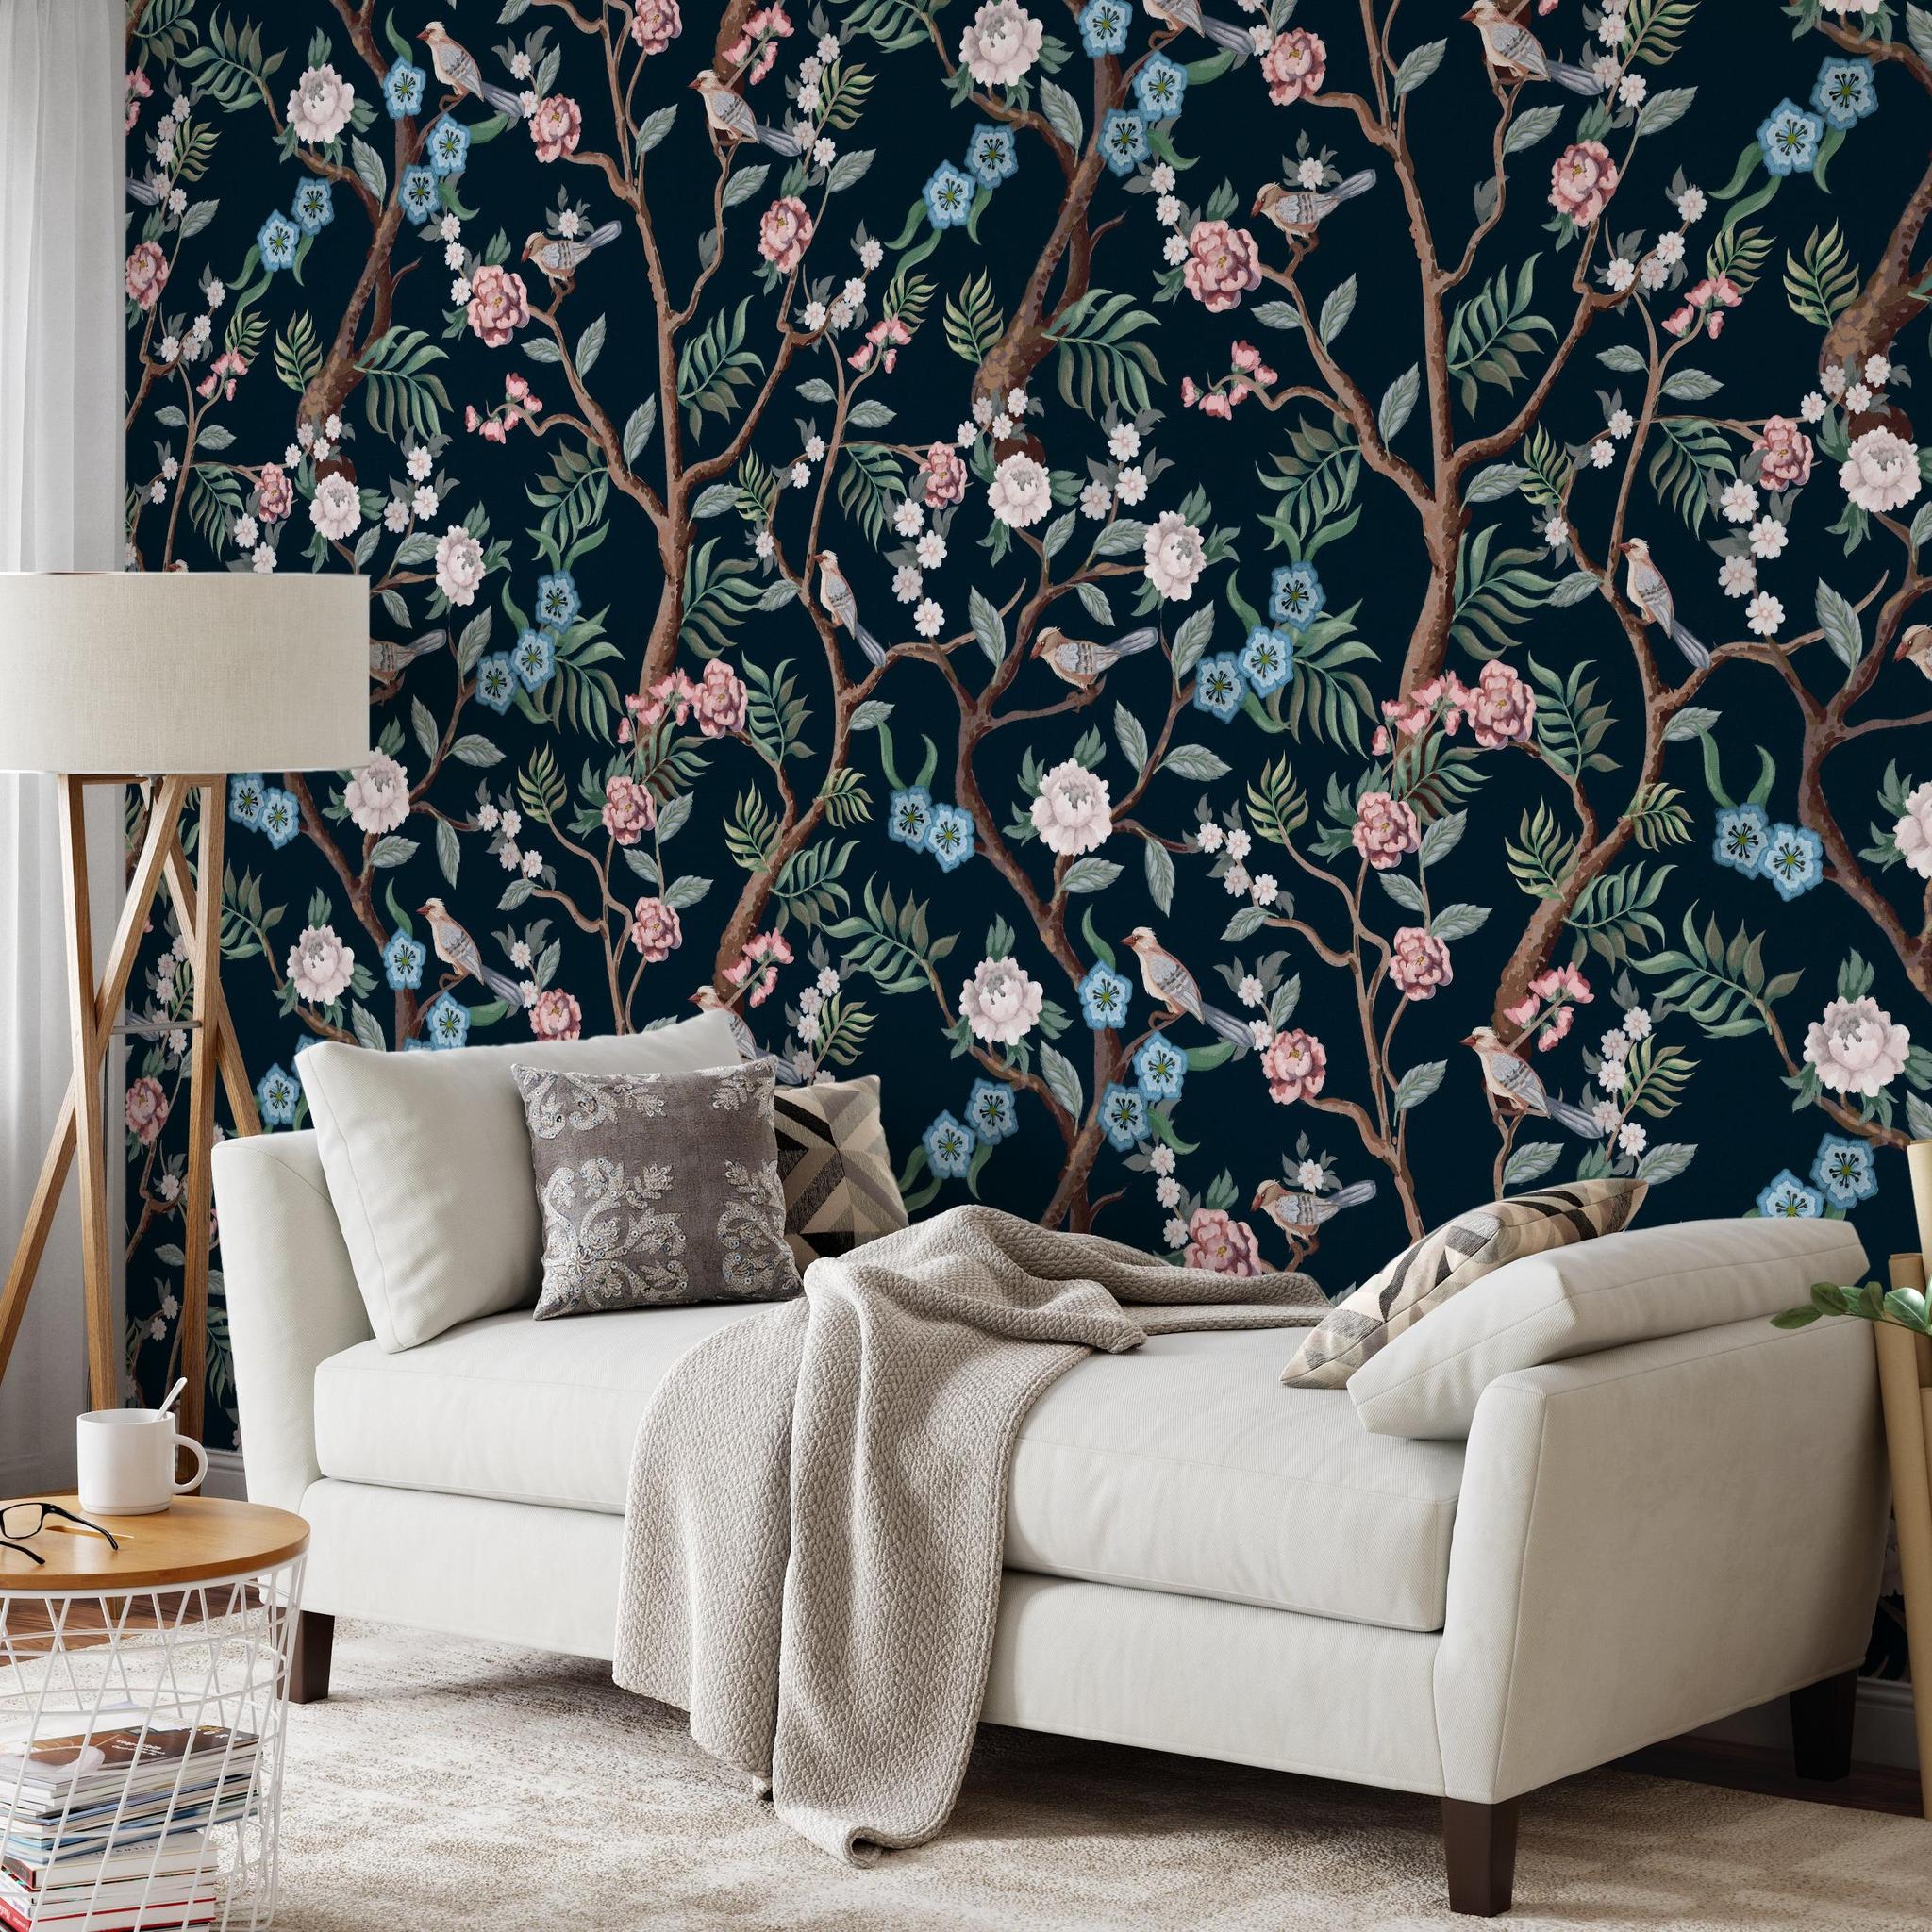 Elegant Ophelia Wallpaper by Wall Blush SG02 in a cozy living room setting, highlighting the floral design focus.
